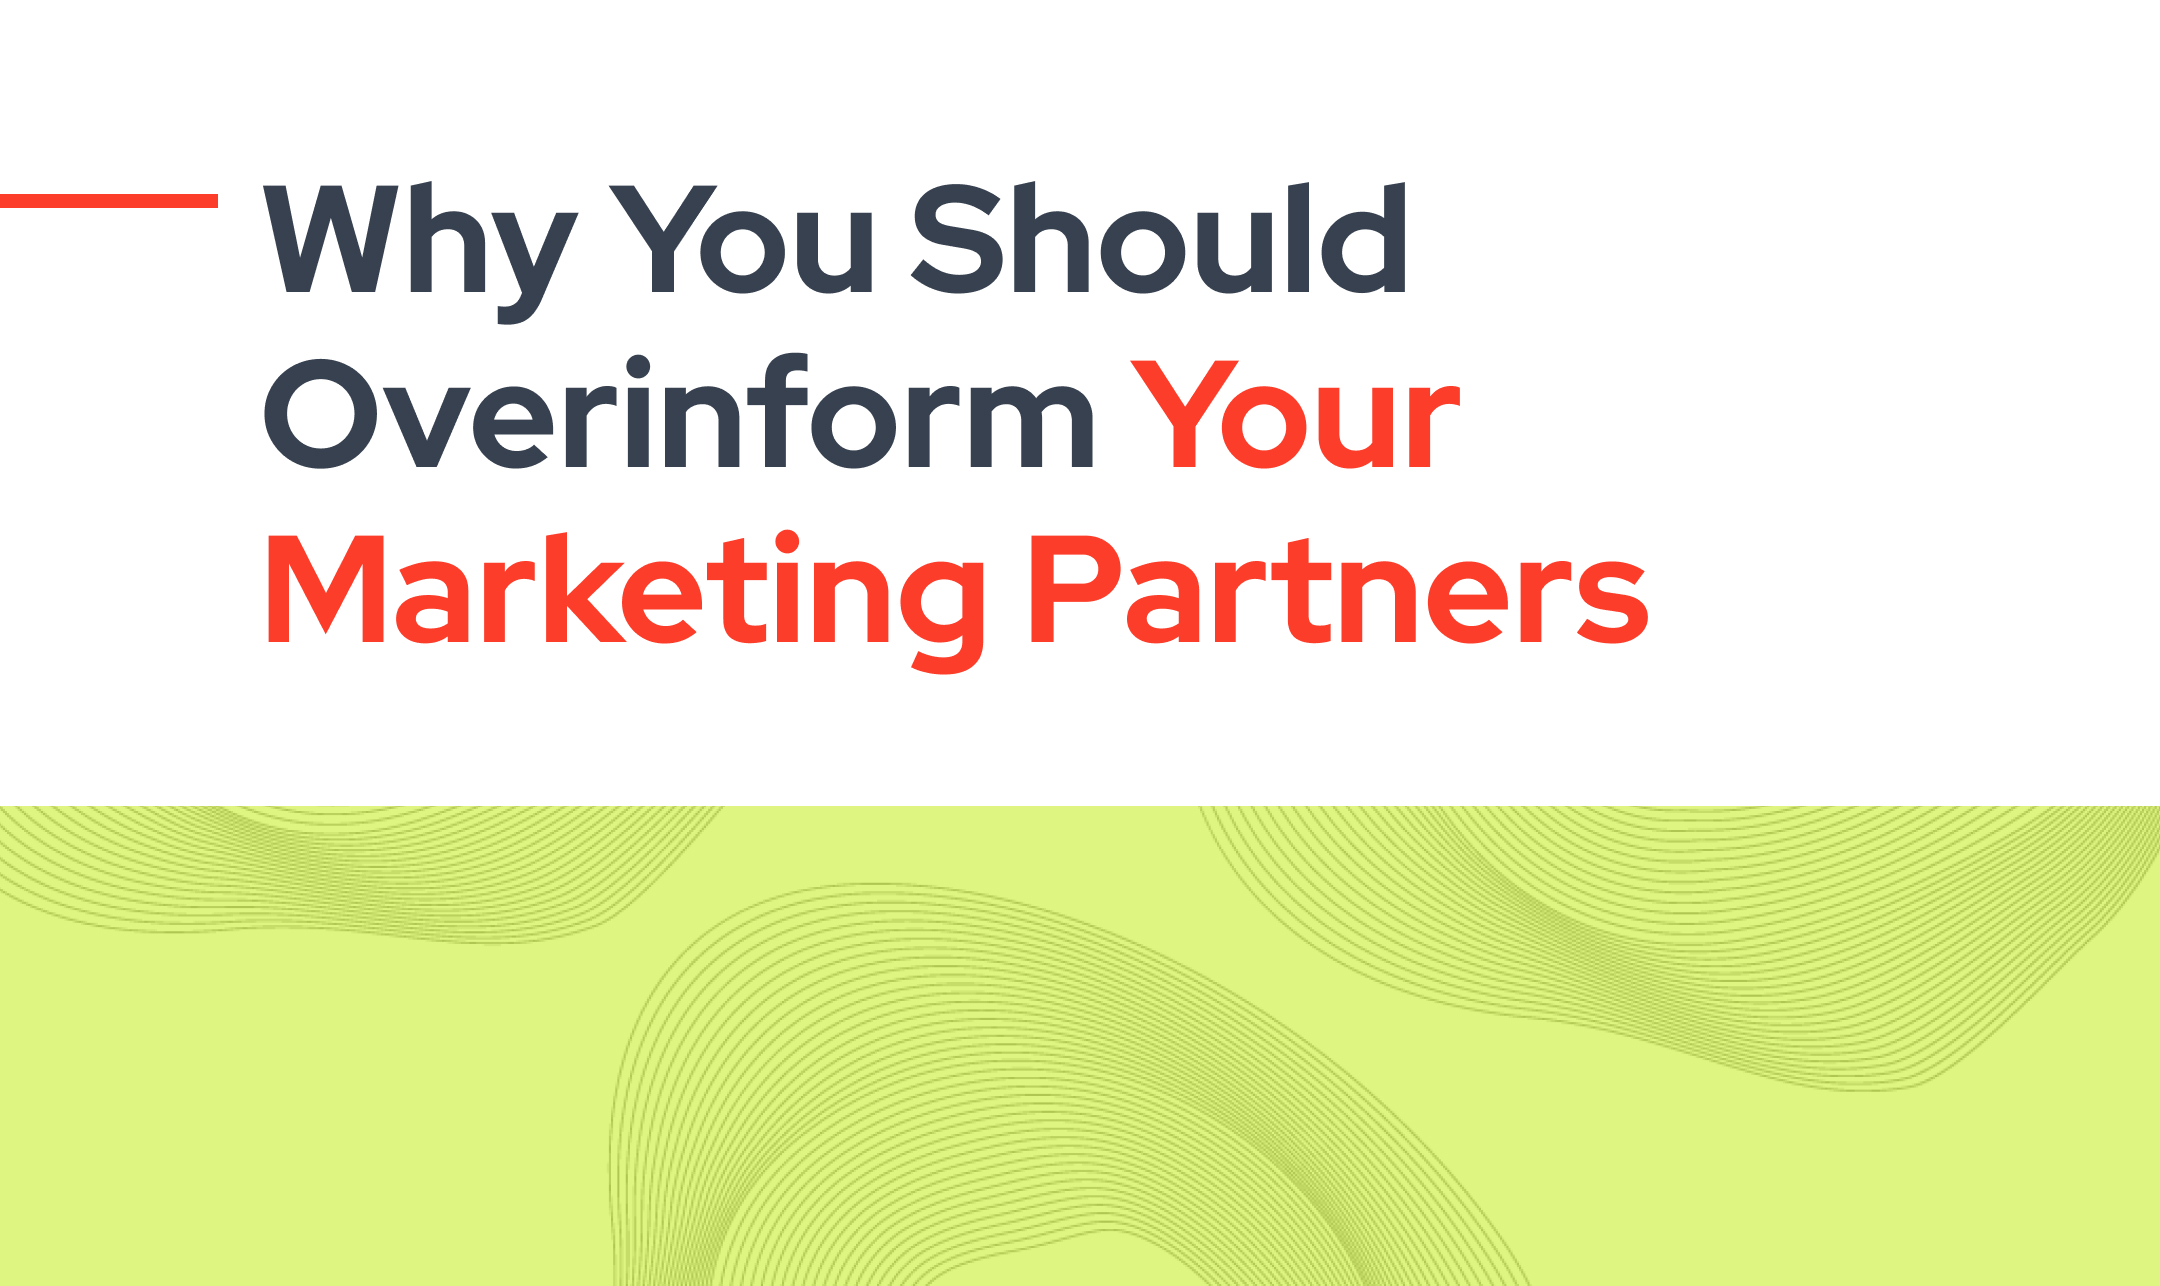 Why you should overinform your marketing partners